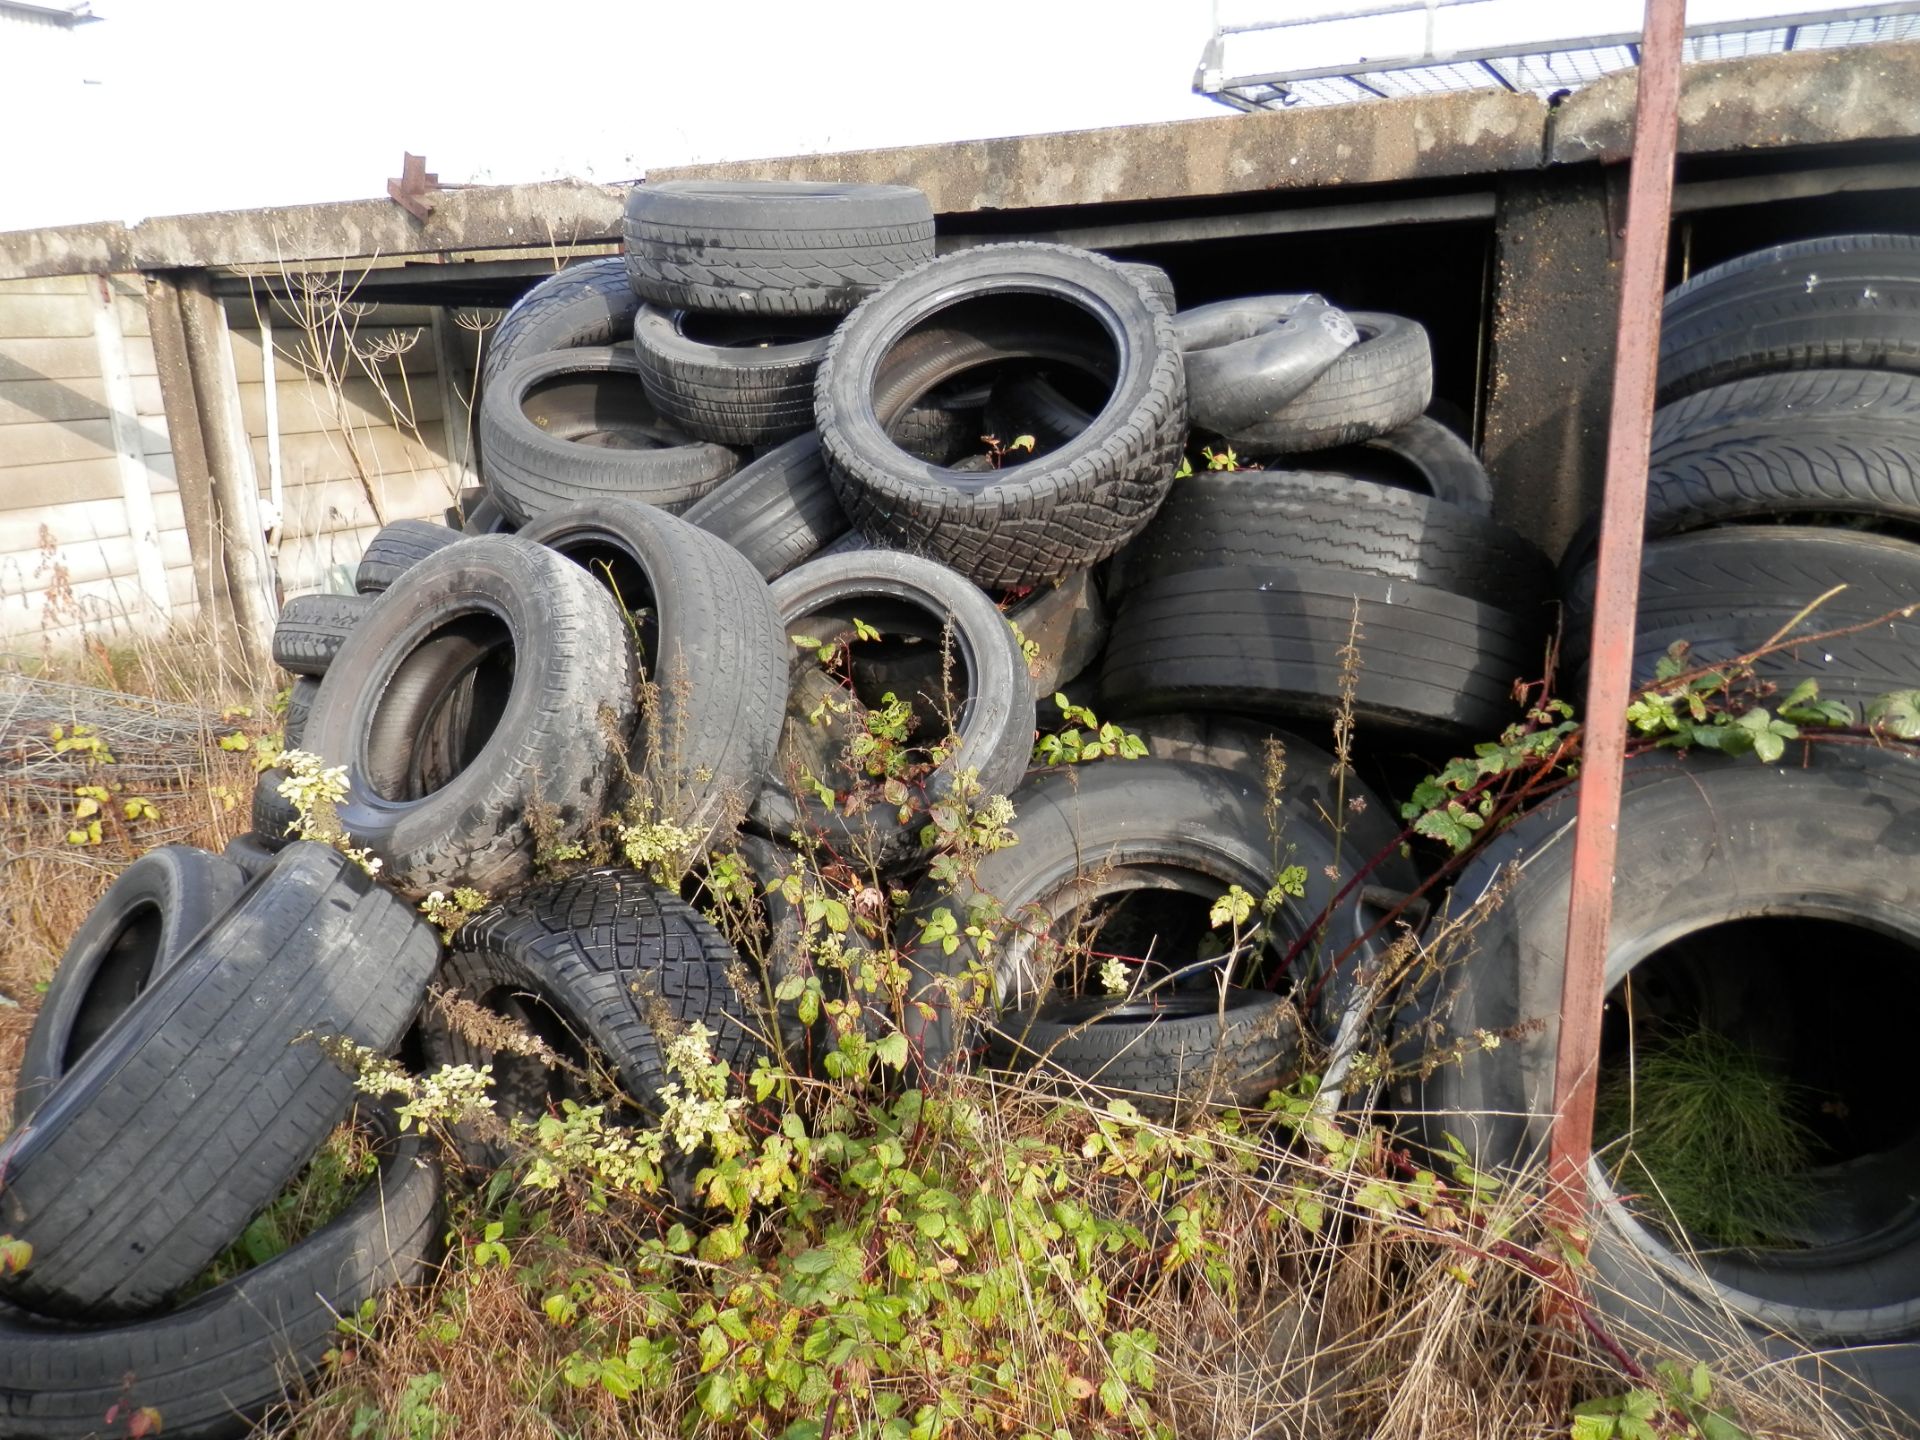 3 GARAGES FULL OF USED, PART WORN TYRES. ASSORTED FROM CAR TO LORRY TYRES. POSSIBLY 800+